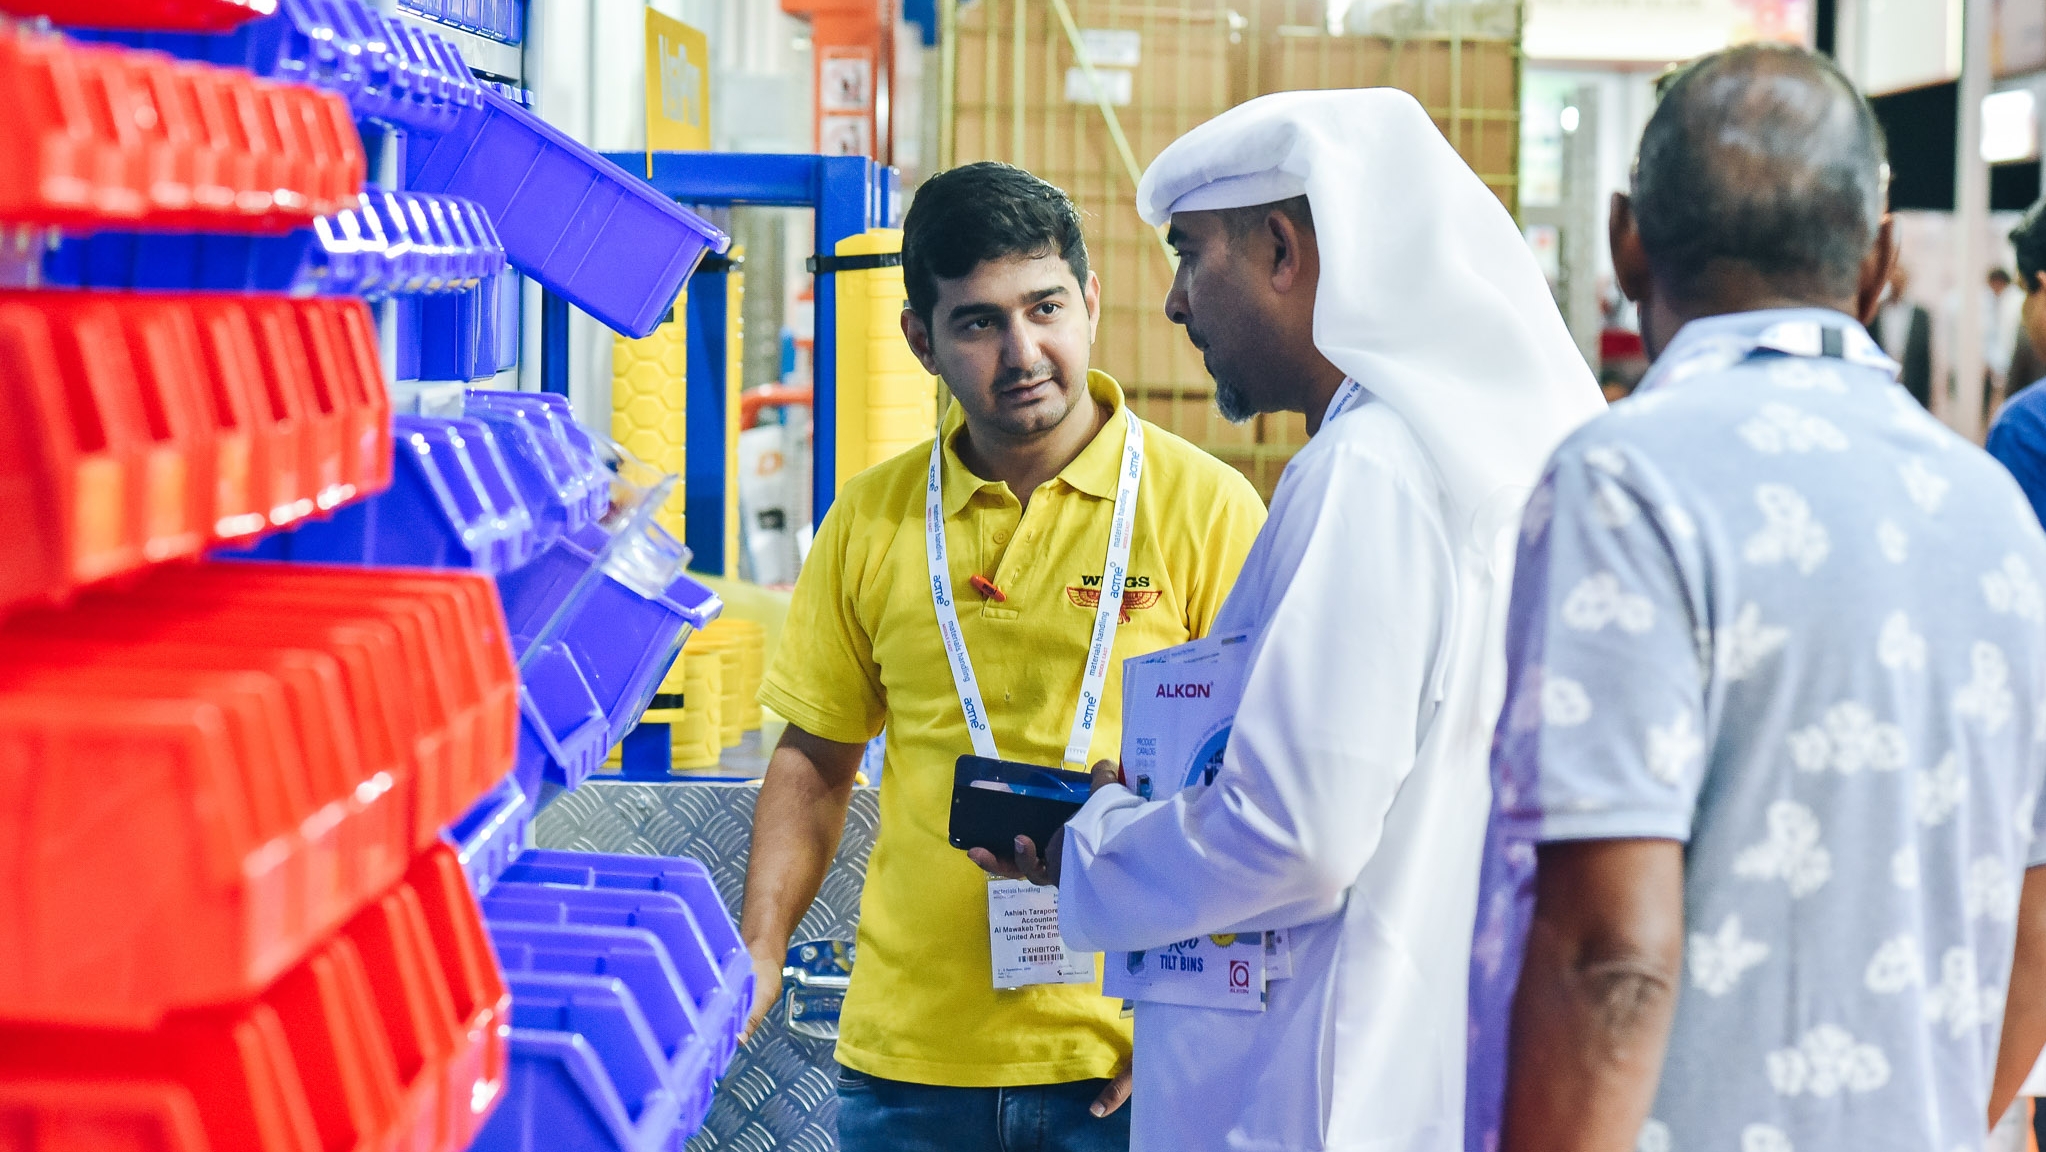 Materials Handling Middle East - 2019 Exhibition